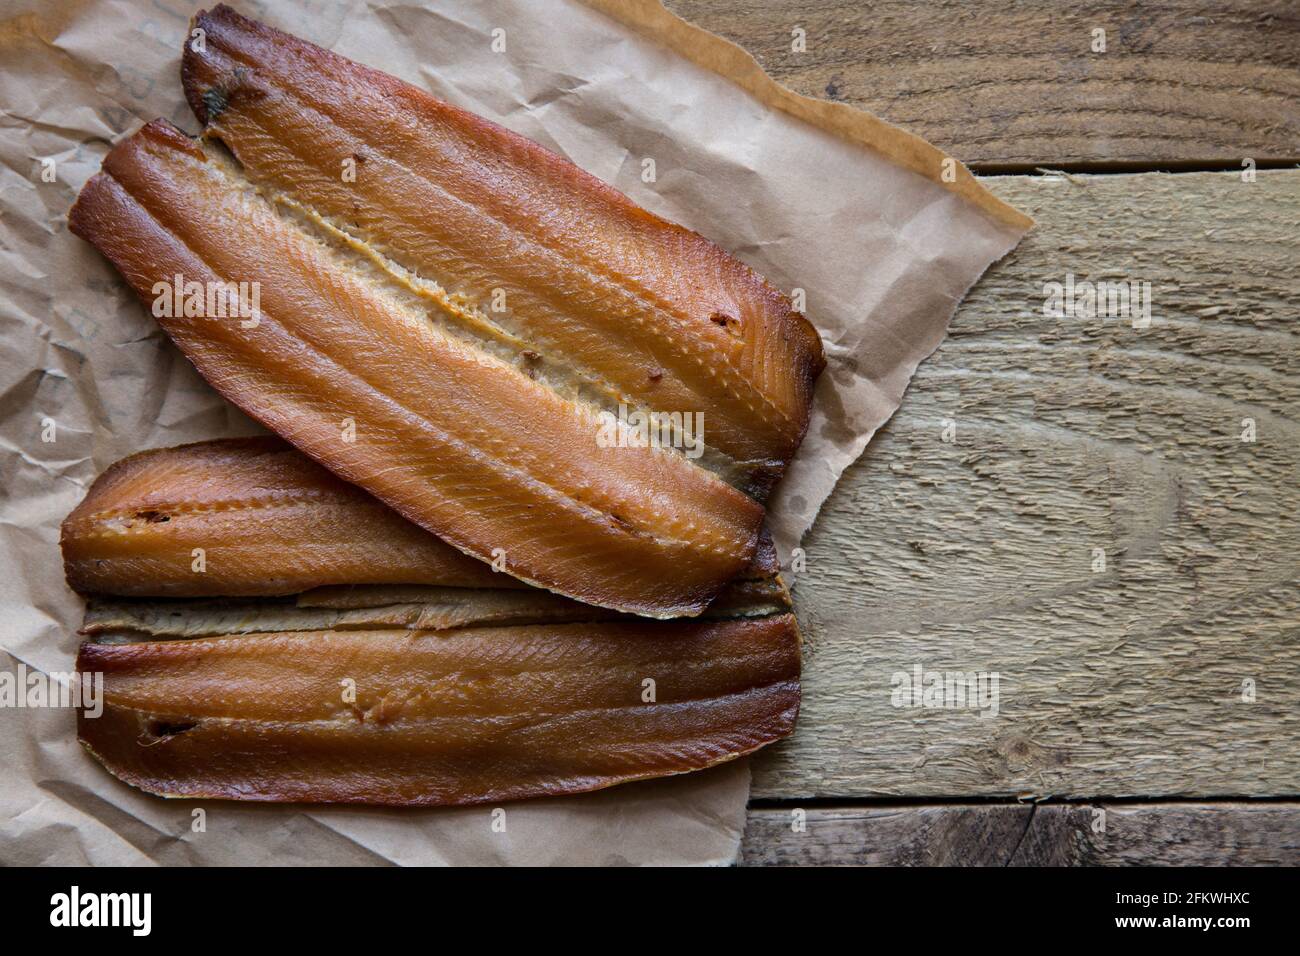 Smoked Craster kipper cutlets presented on a wooden background. Kippers are smoked herrings and are rich in fish oils. England UK GB Stock Photo